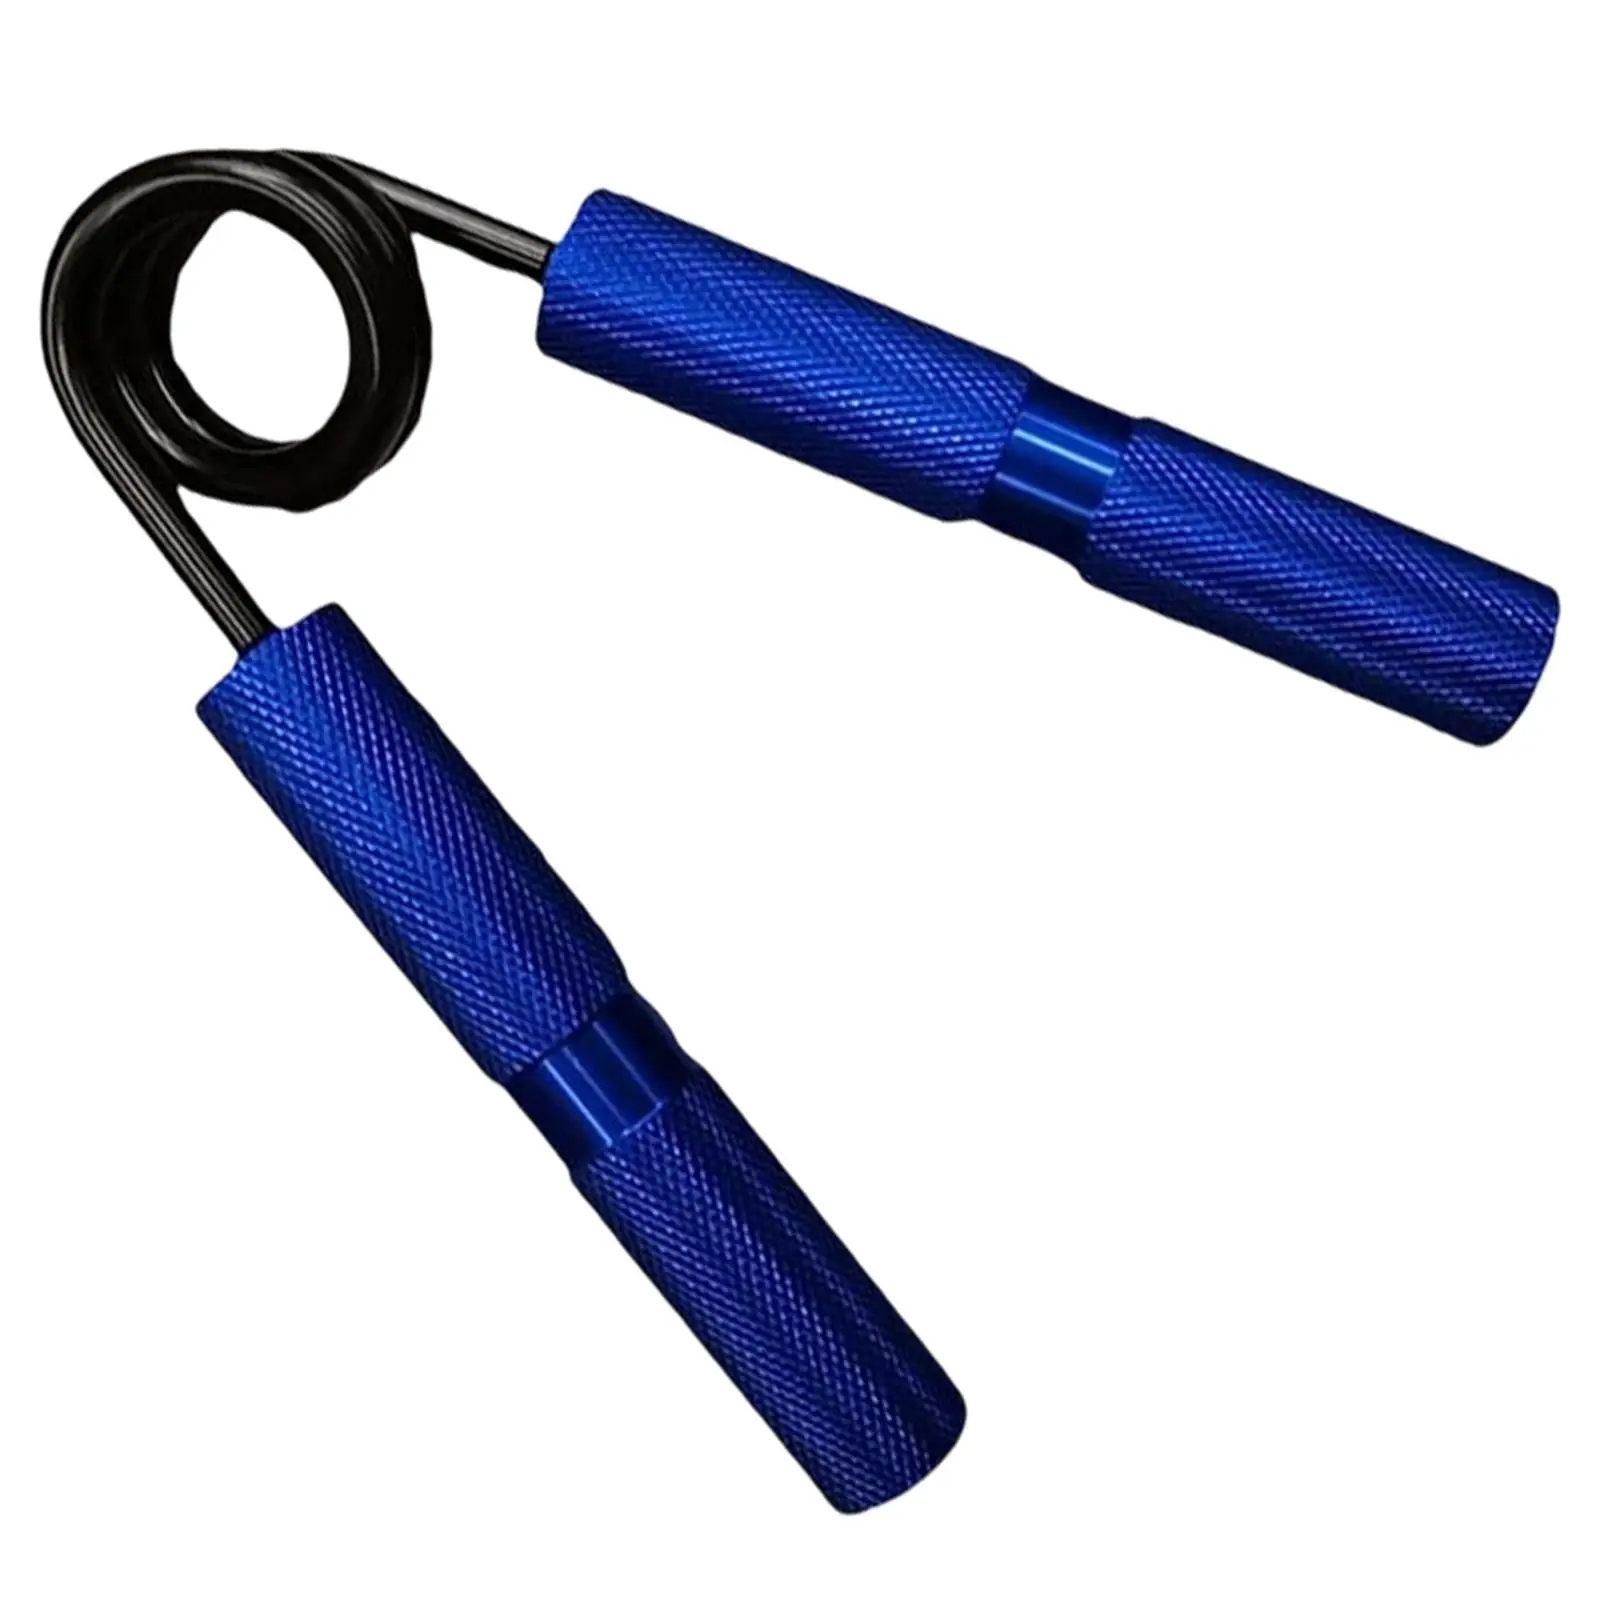 Hand Grip Strengthener 100lbs-350lbs Unisex Stretchy   Device Fitness